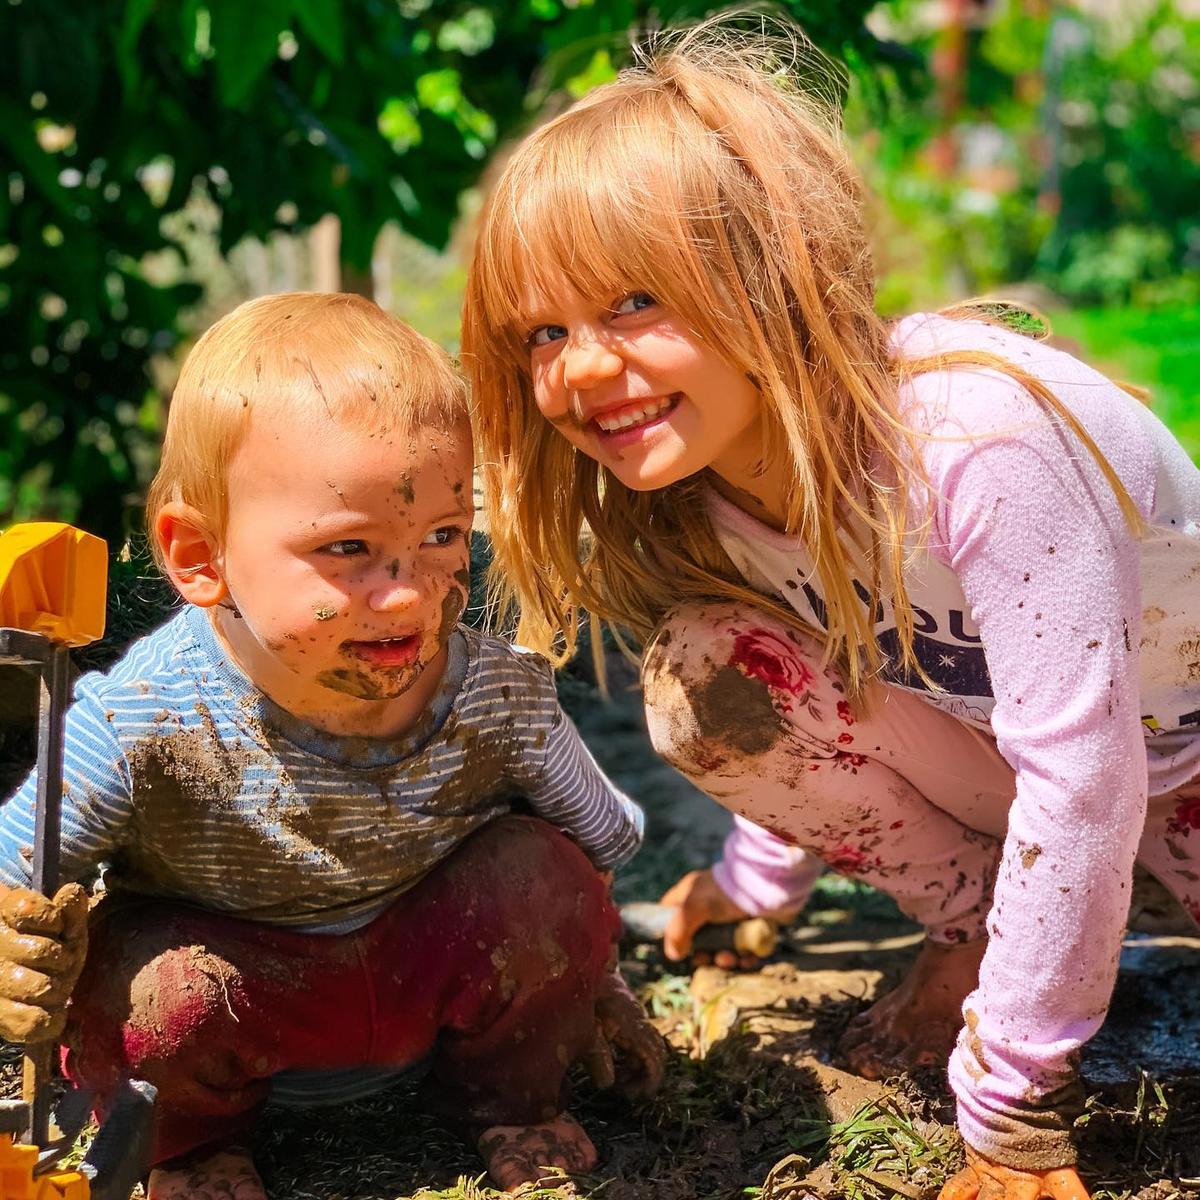 Evelyn and Christopher playing in the garden. (Courtesy of <a href="https://www.instagram.com/mykidsaredirtyagain/">Taylor Raine</a>)